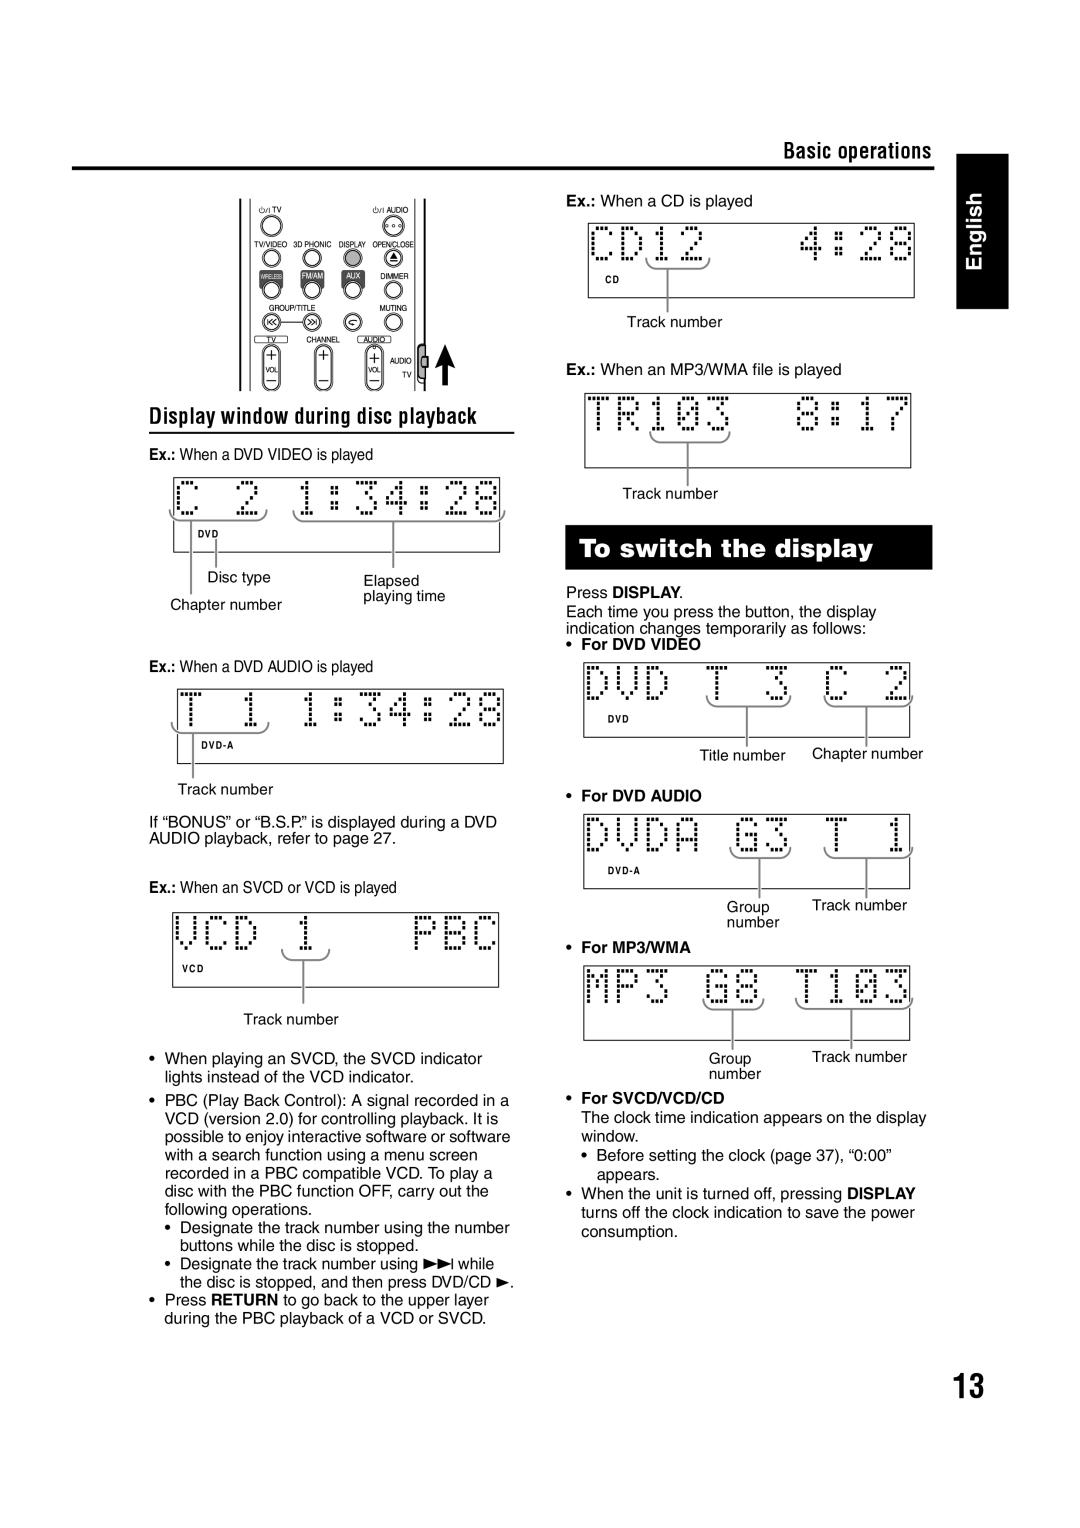 JVC GVT0144-005A manual To switch the display, Basic operations, Display window during disc playback, English 